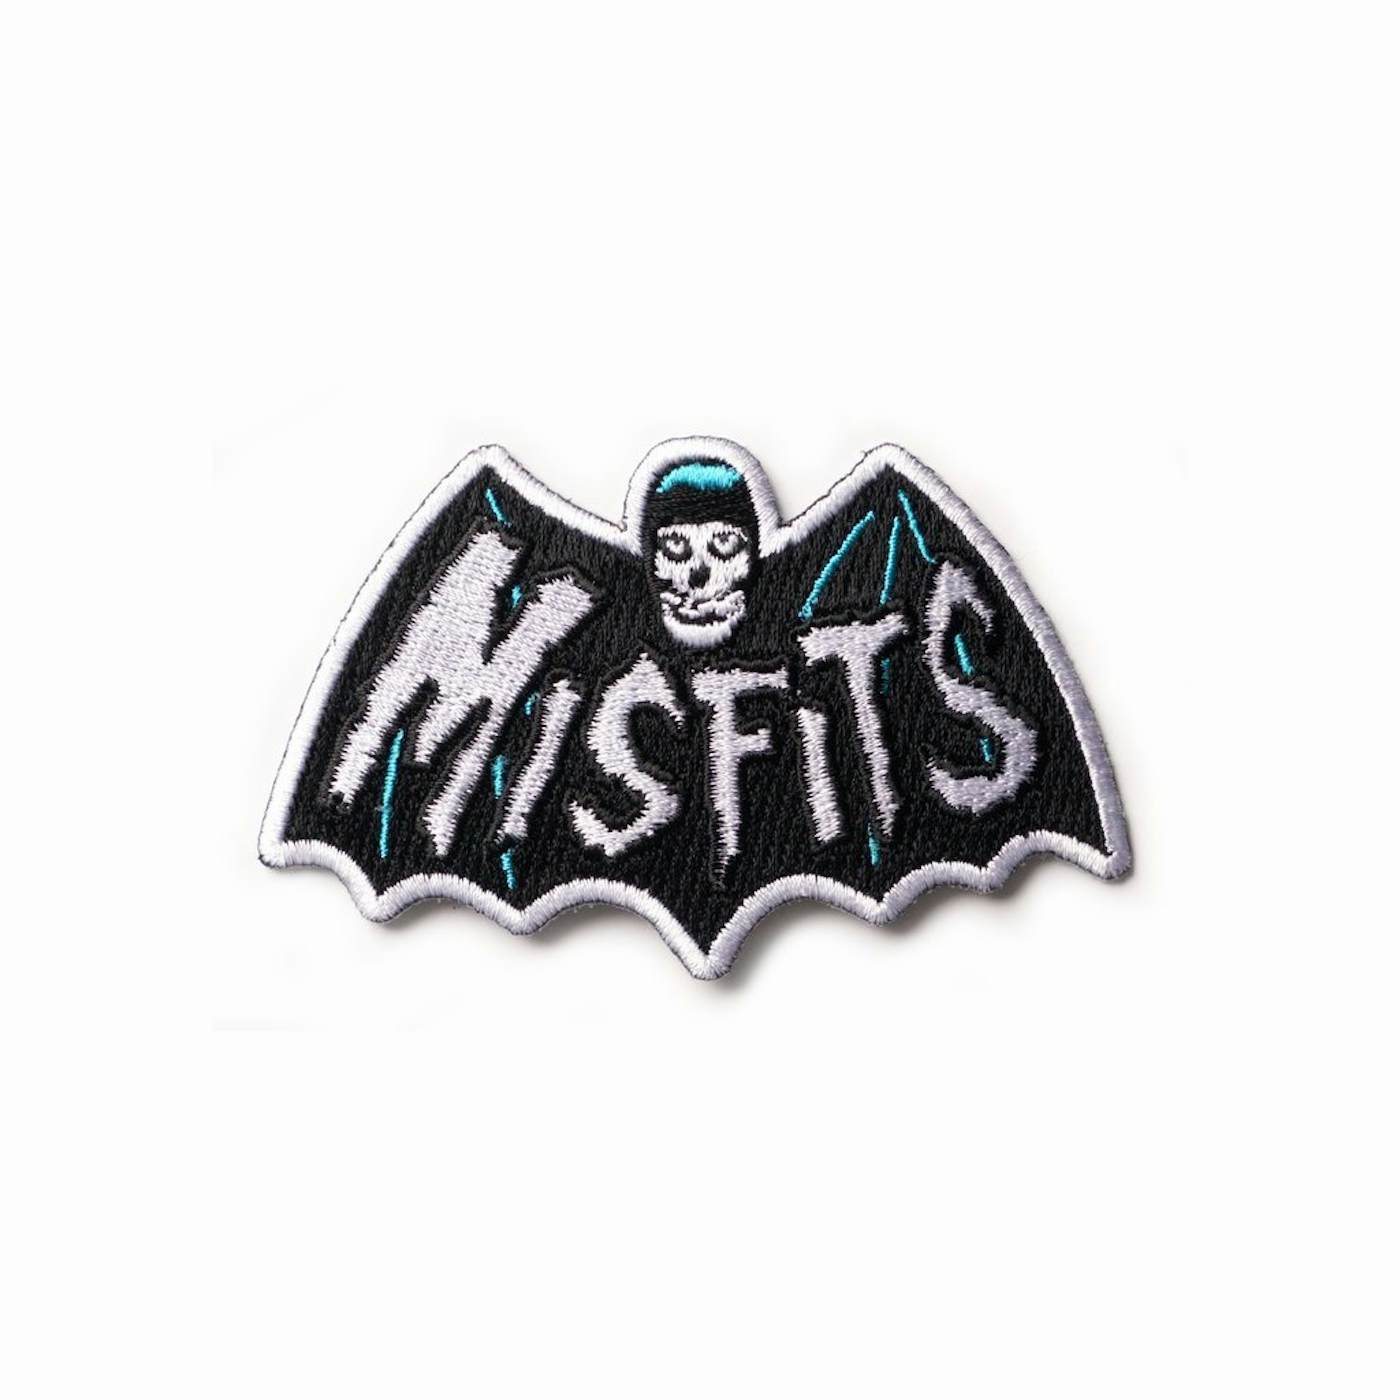 Misfits Old School Bat Fiend Patch Punk Rock Band Embroidered Iron On